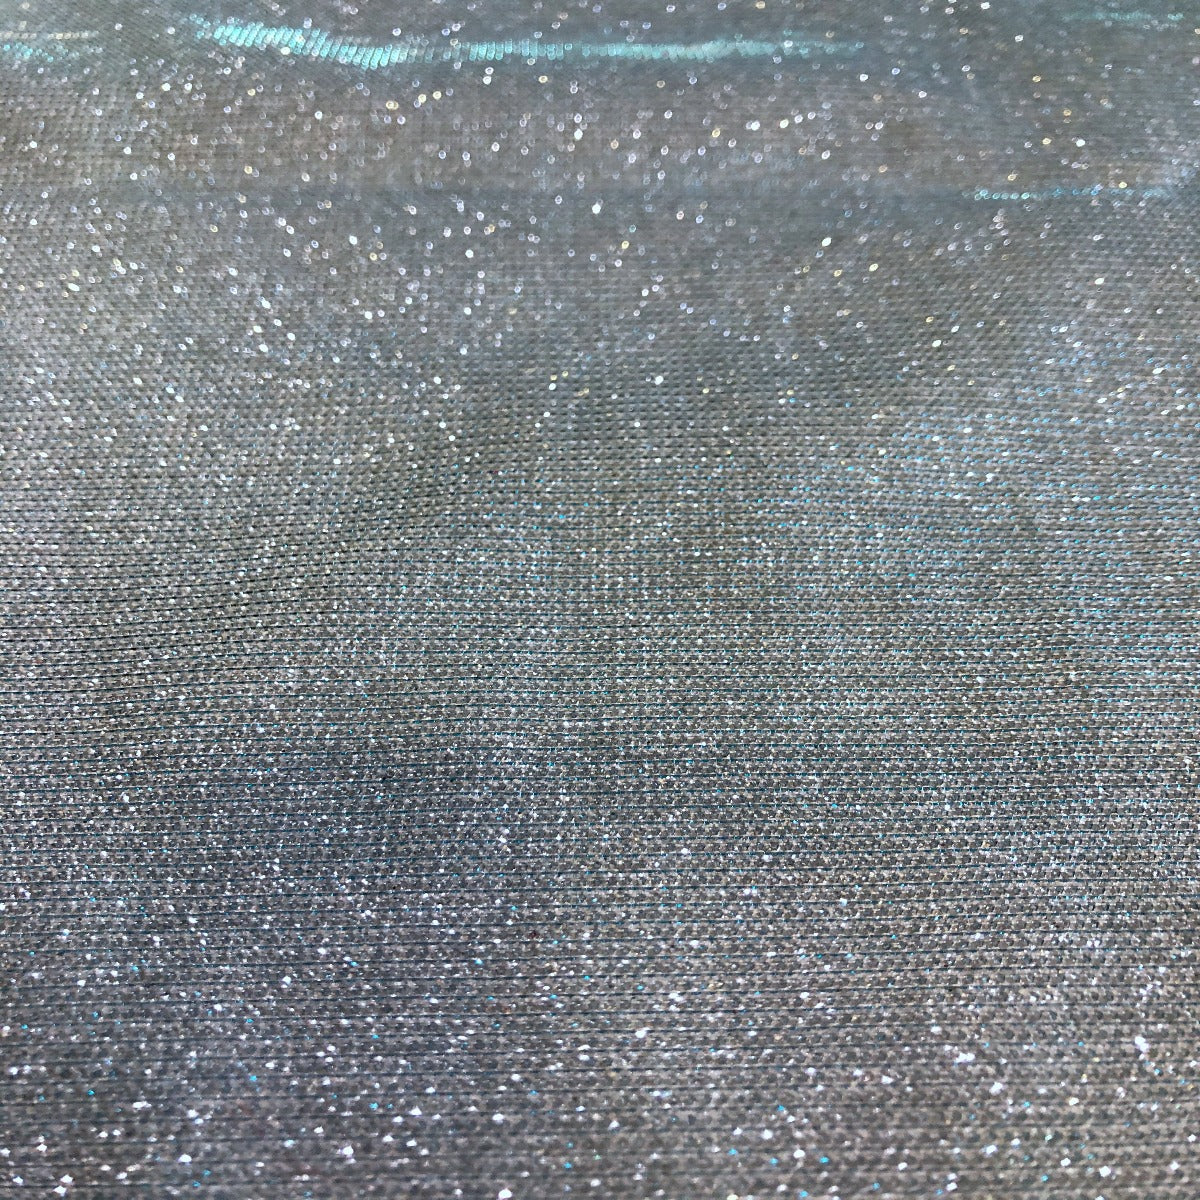 Baby Blue Silver Holographic Shimmer Glitter Spandex Fabric - Fashion Fabrics Los Angeles 